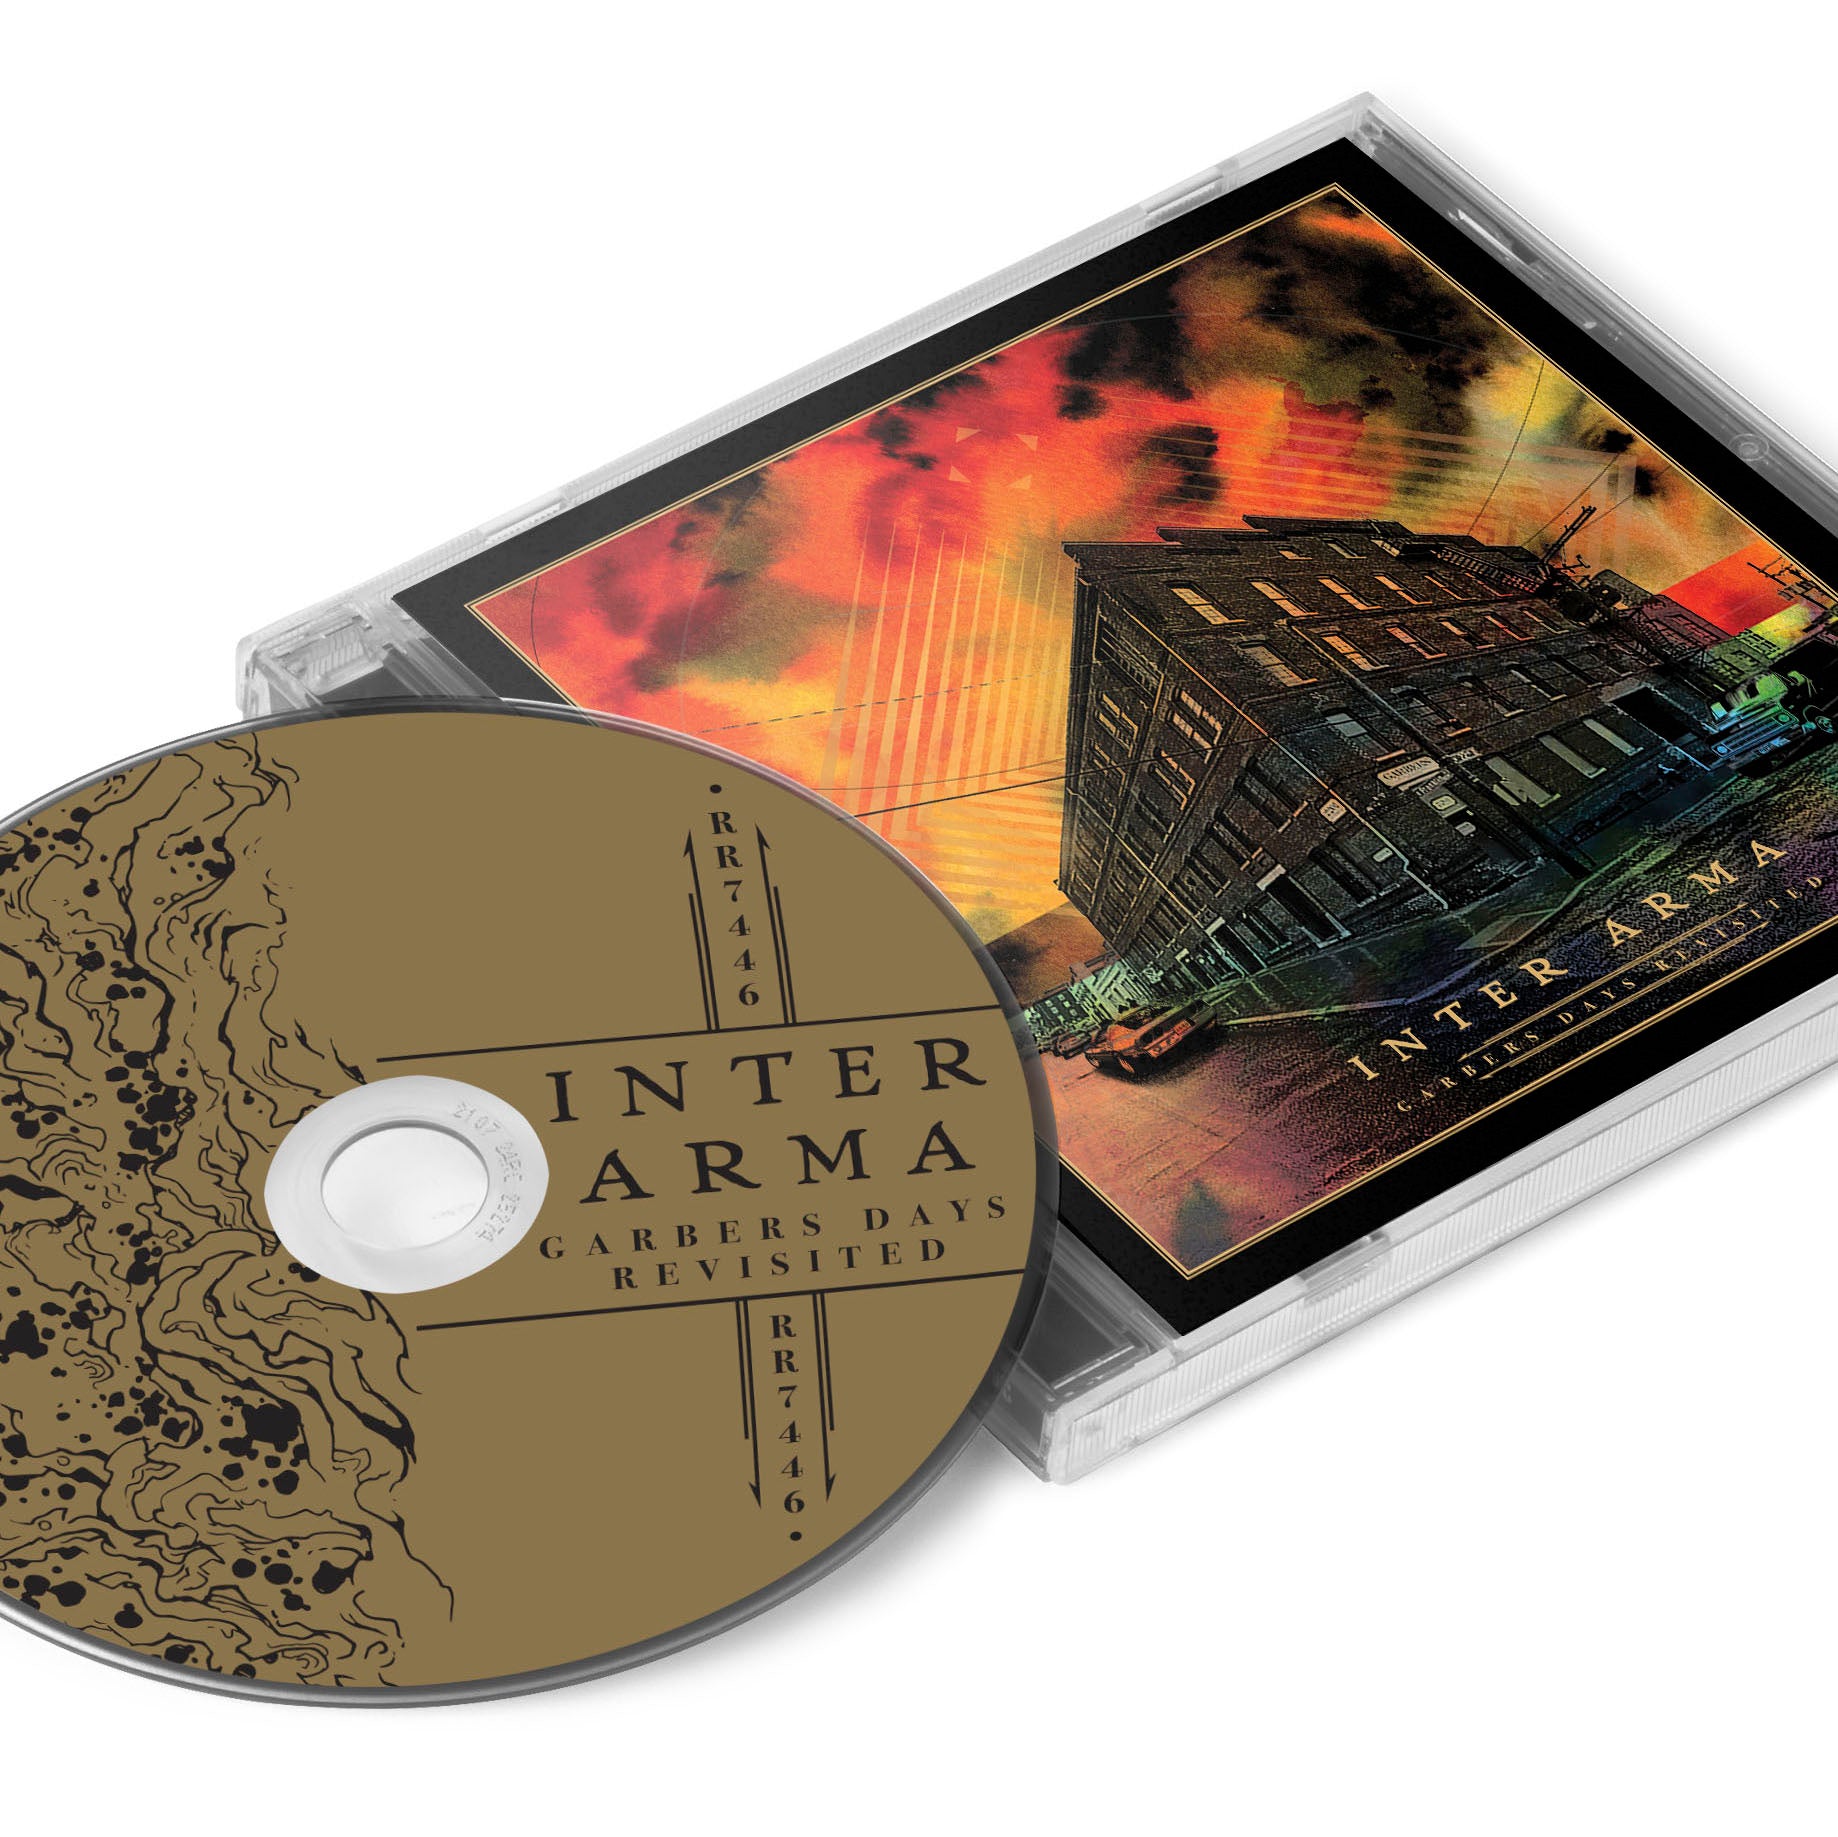 Inter Arma "Garbers Days Revisited" CD